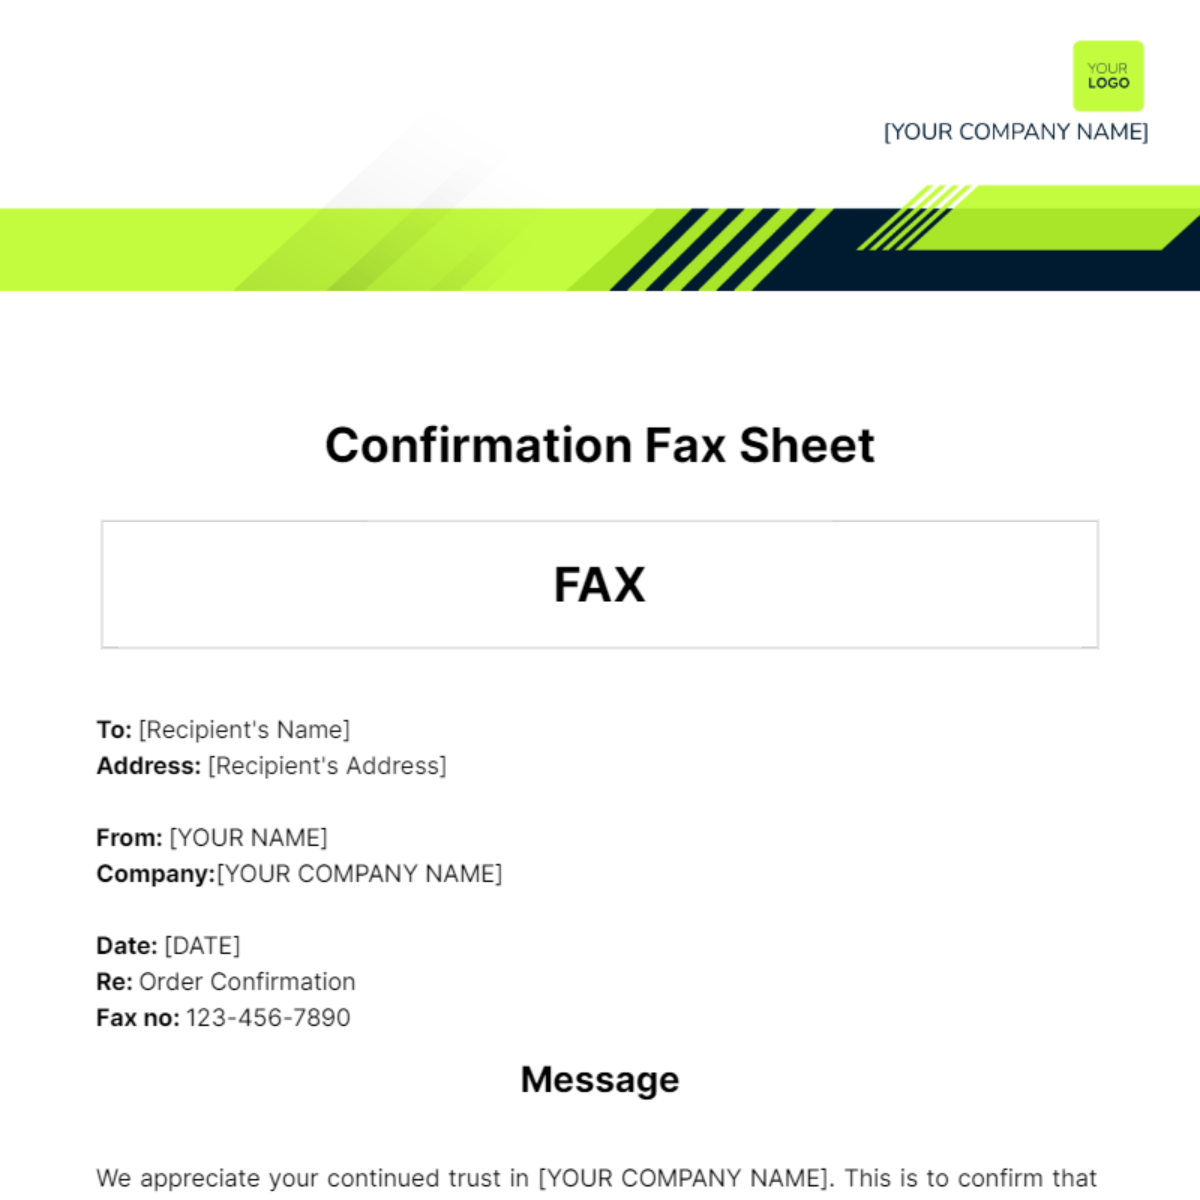 Free Confirmation Fax Sheet Template